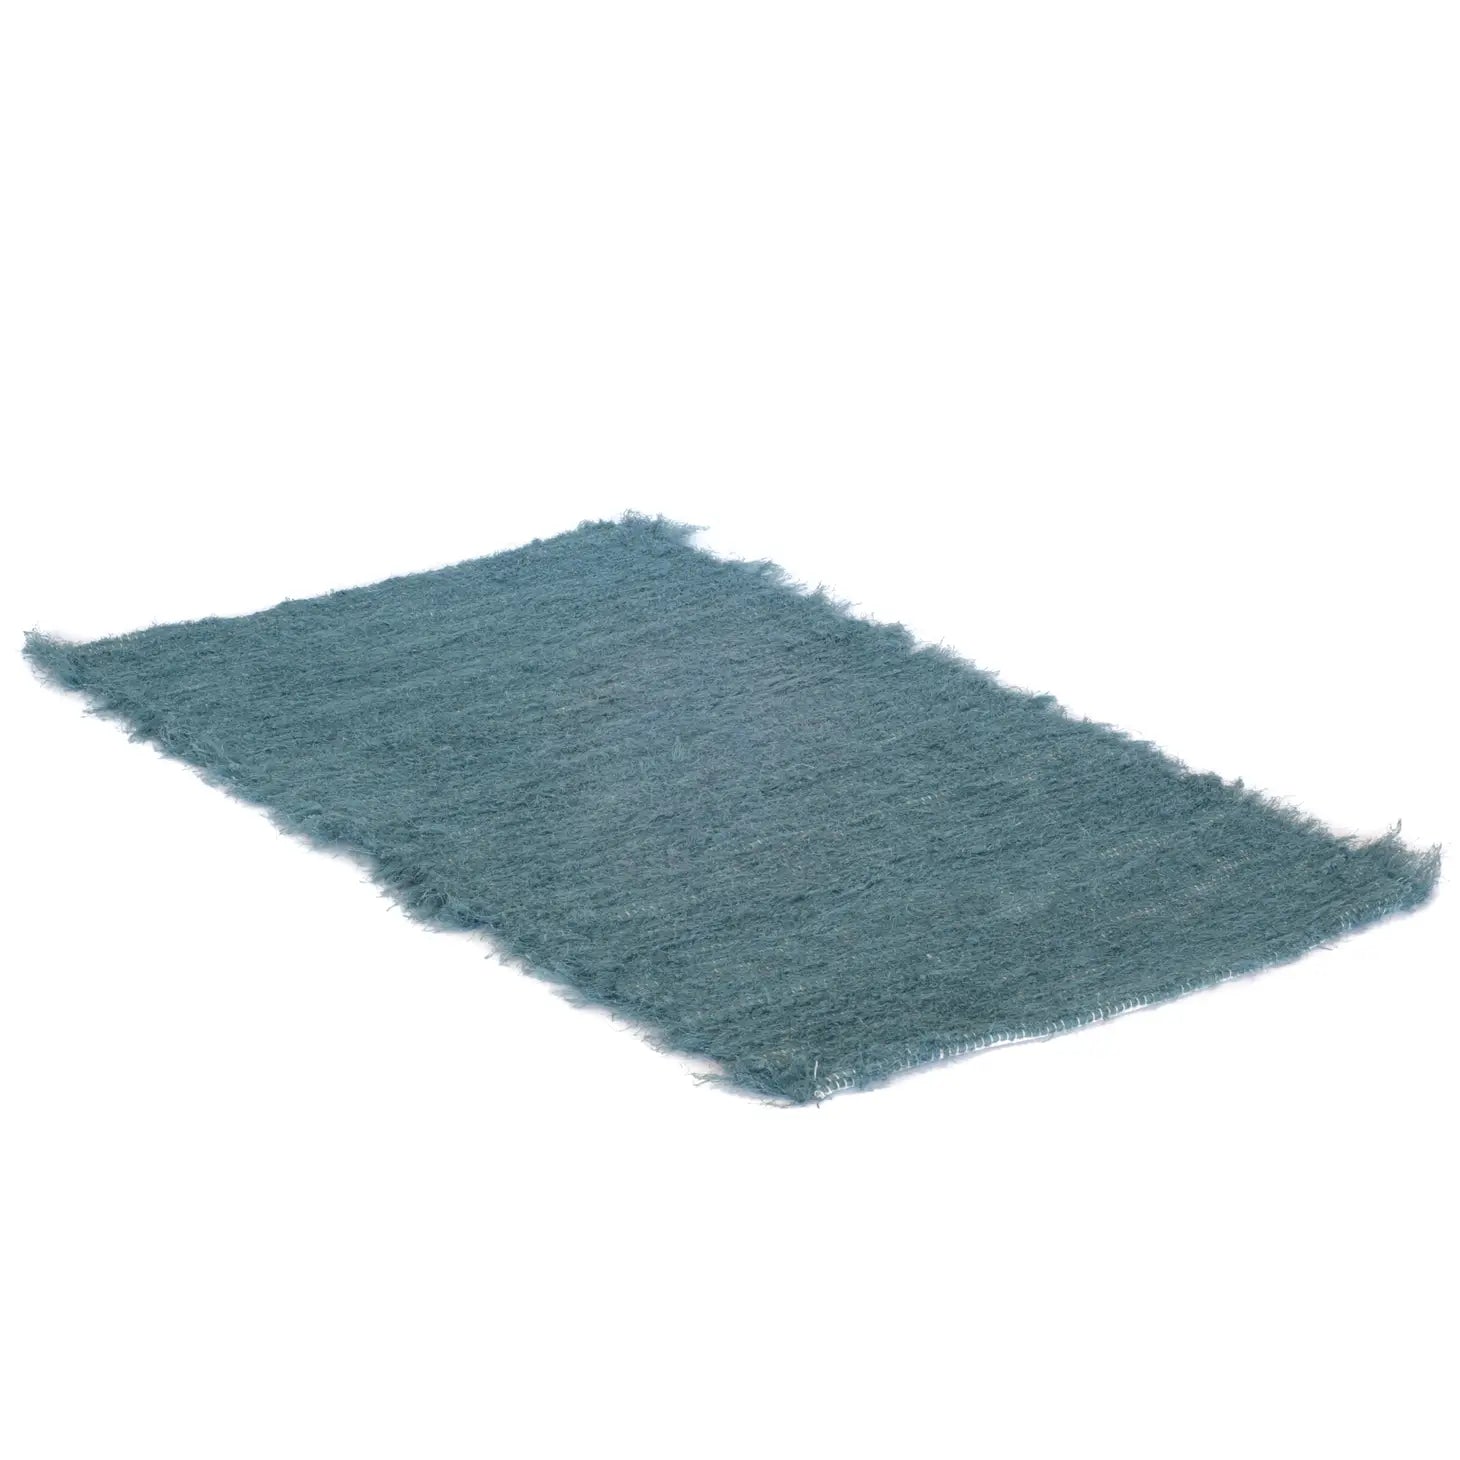 Maia Ecofriendly Rug Handwoven With Upcycled Linen In Blue